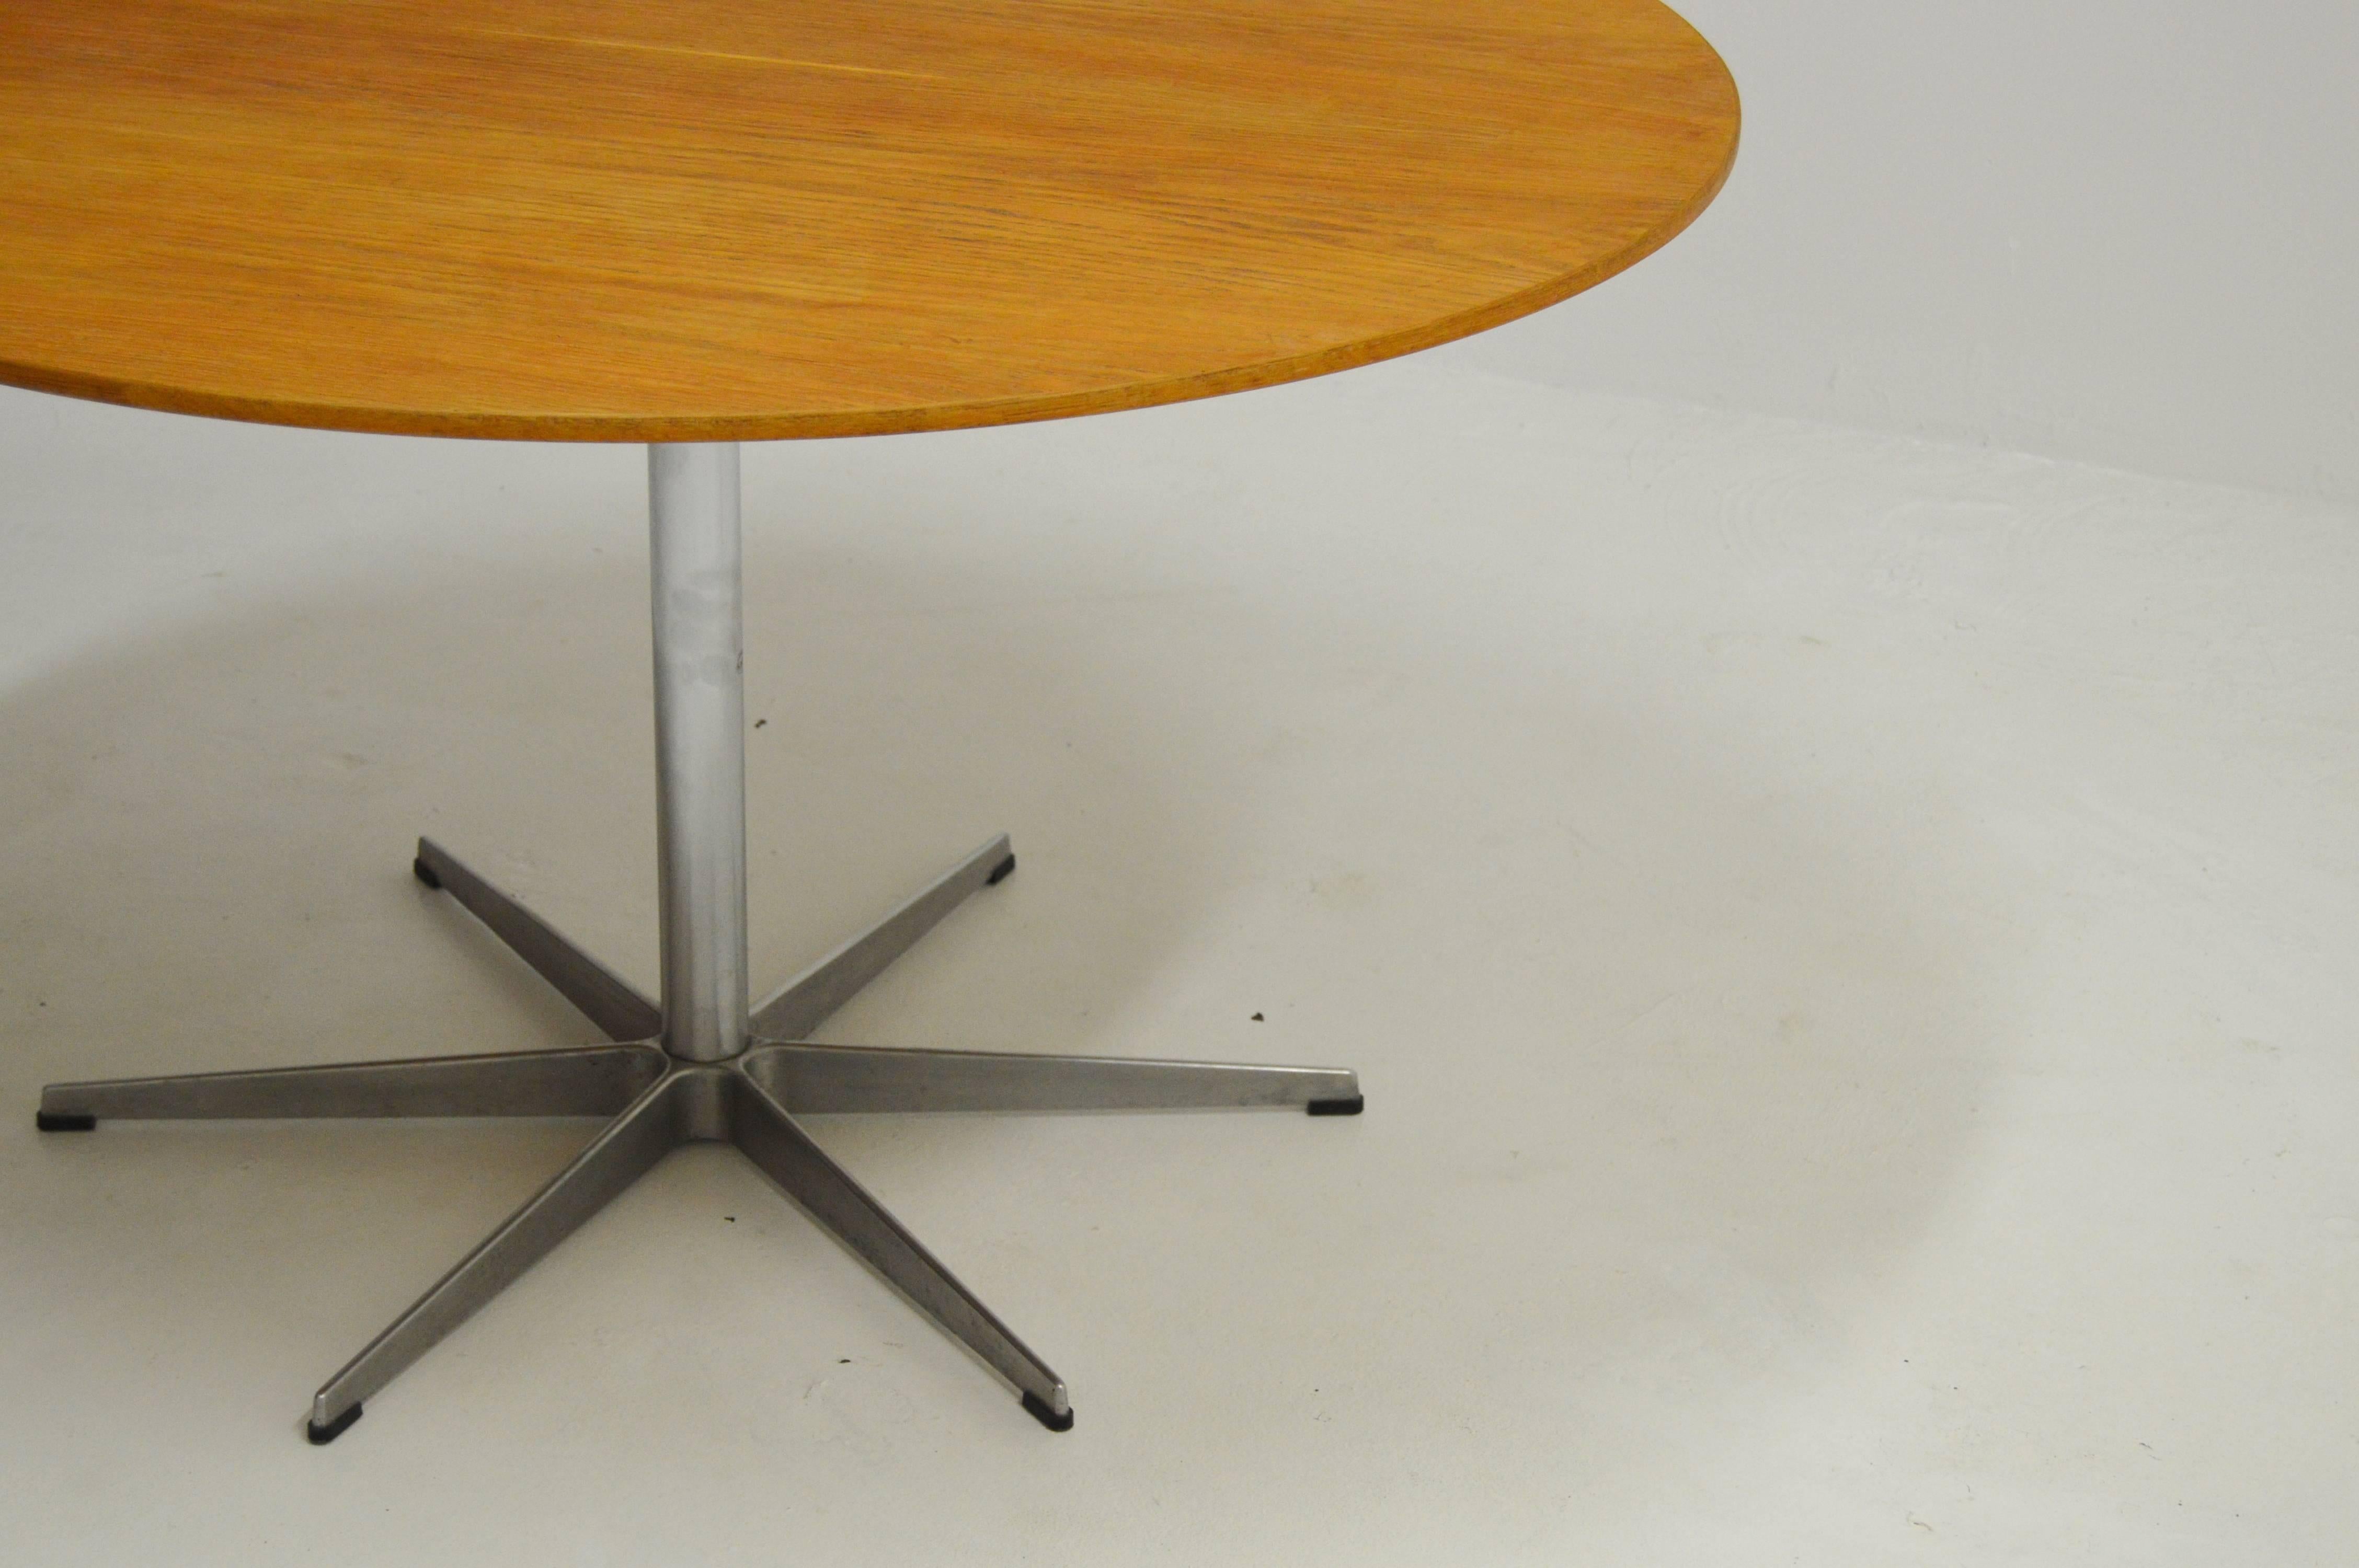 Late 20th Century A825 Circular Oak Six Star Table by Arne Jacobsen for Fritz Hansen For Sale